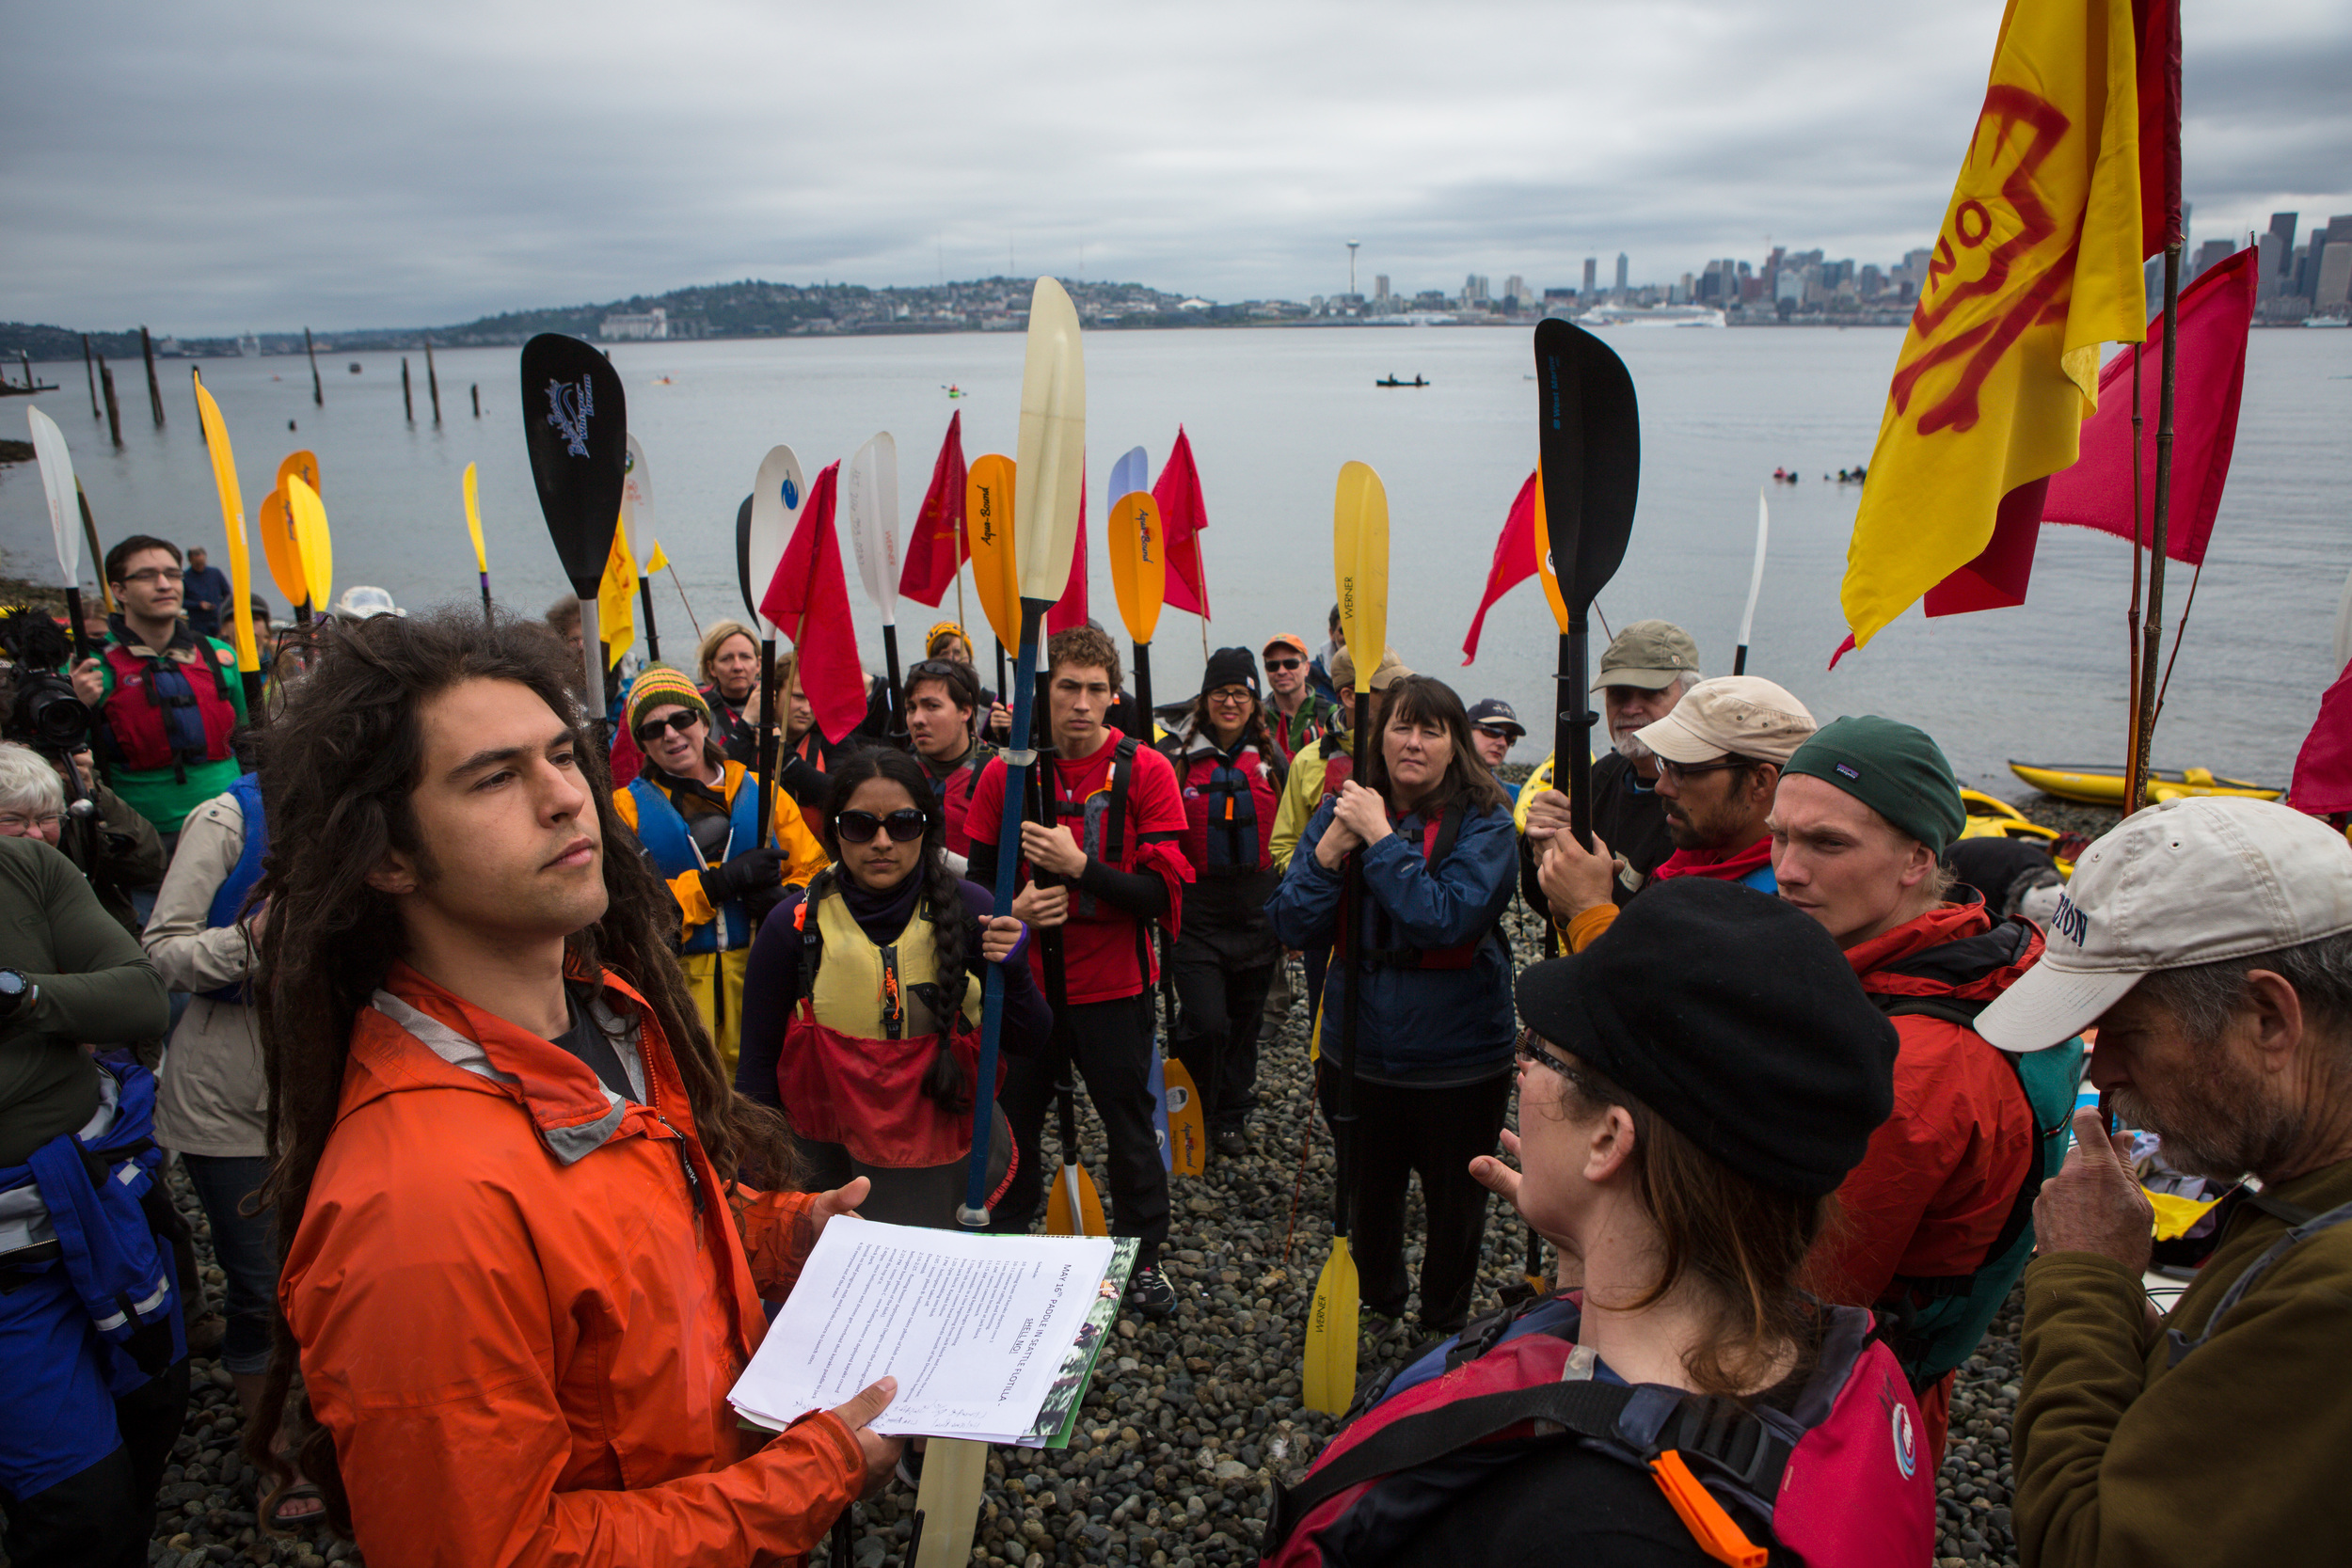   Kayaktivists prepare to take to the water during protest against drilling in the Arctic and the Port of Seattle being used as a port for the Shell Oil drilling rig Polar Pioneer. The protest flotilla drew many paddlers to show their displeasure wit